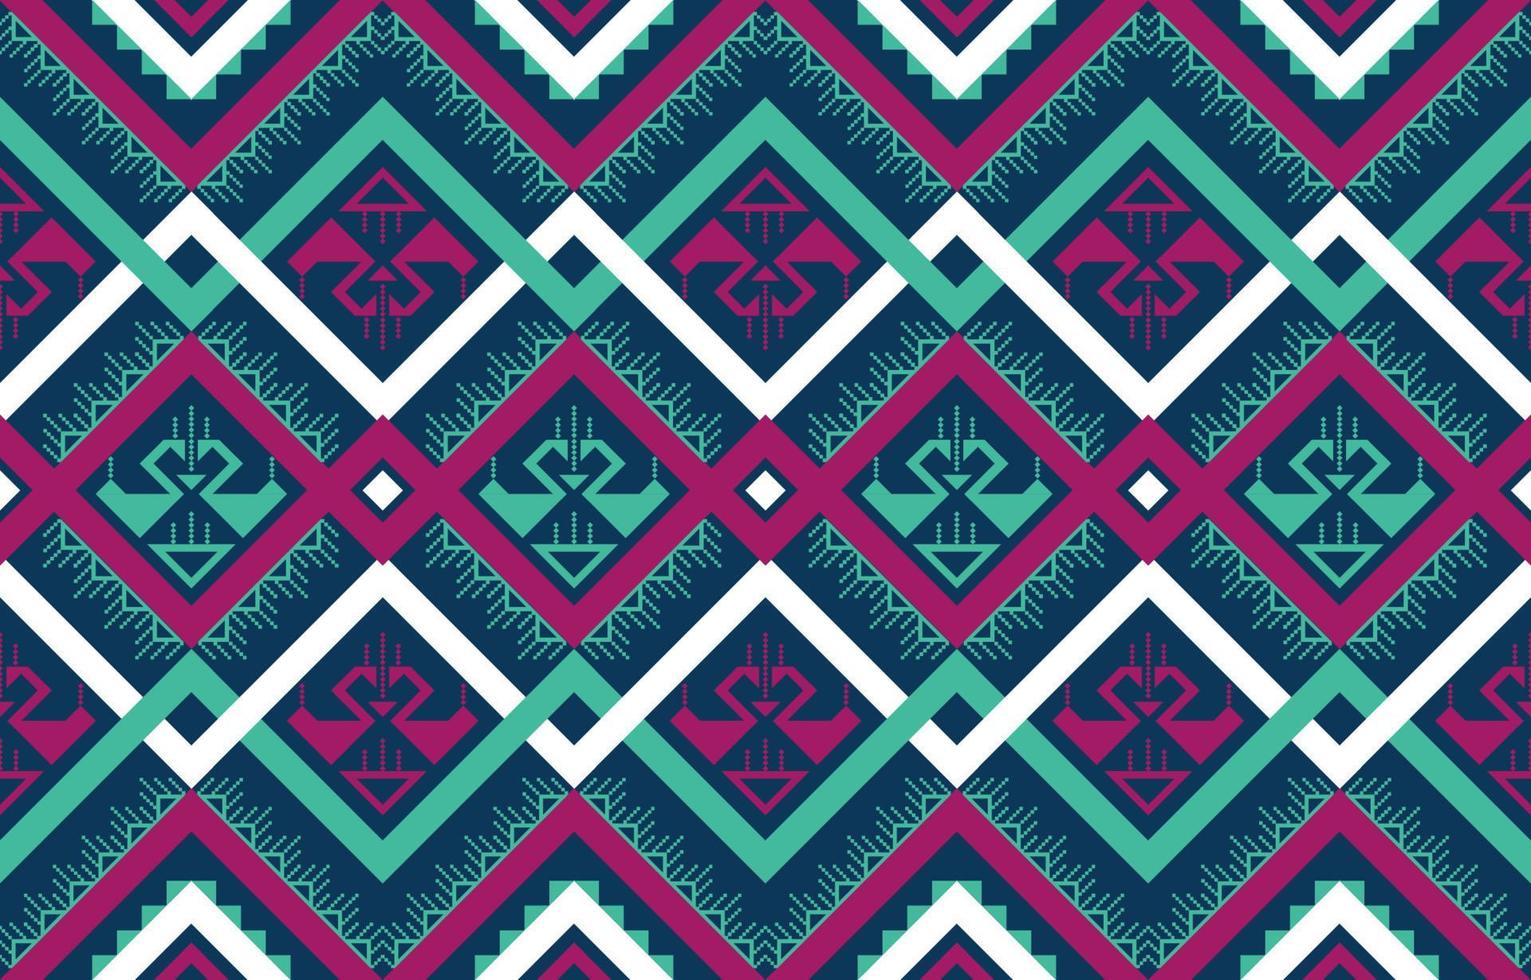 Geometric ethnic seamless pattern tribal traditional. design for background, illustration, wallpaper, fabric, texture, batik, carpet, clothing, embroidery vector